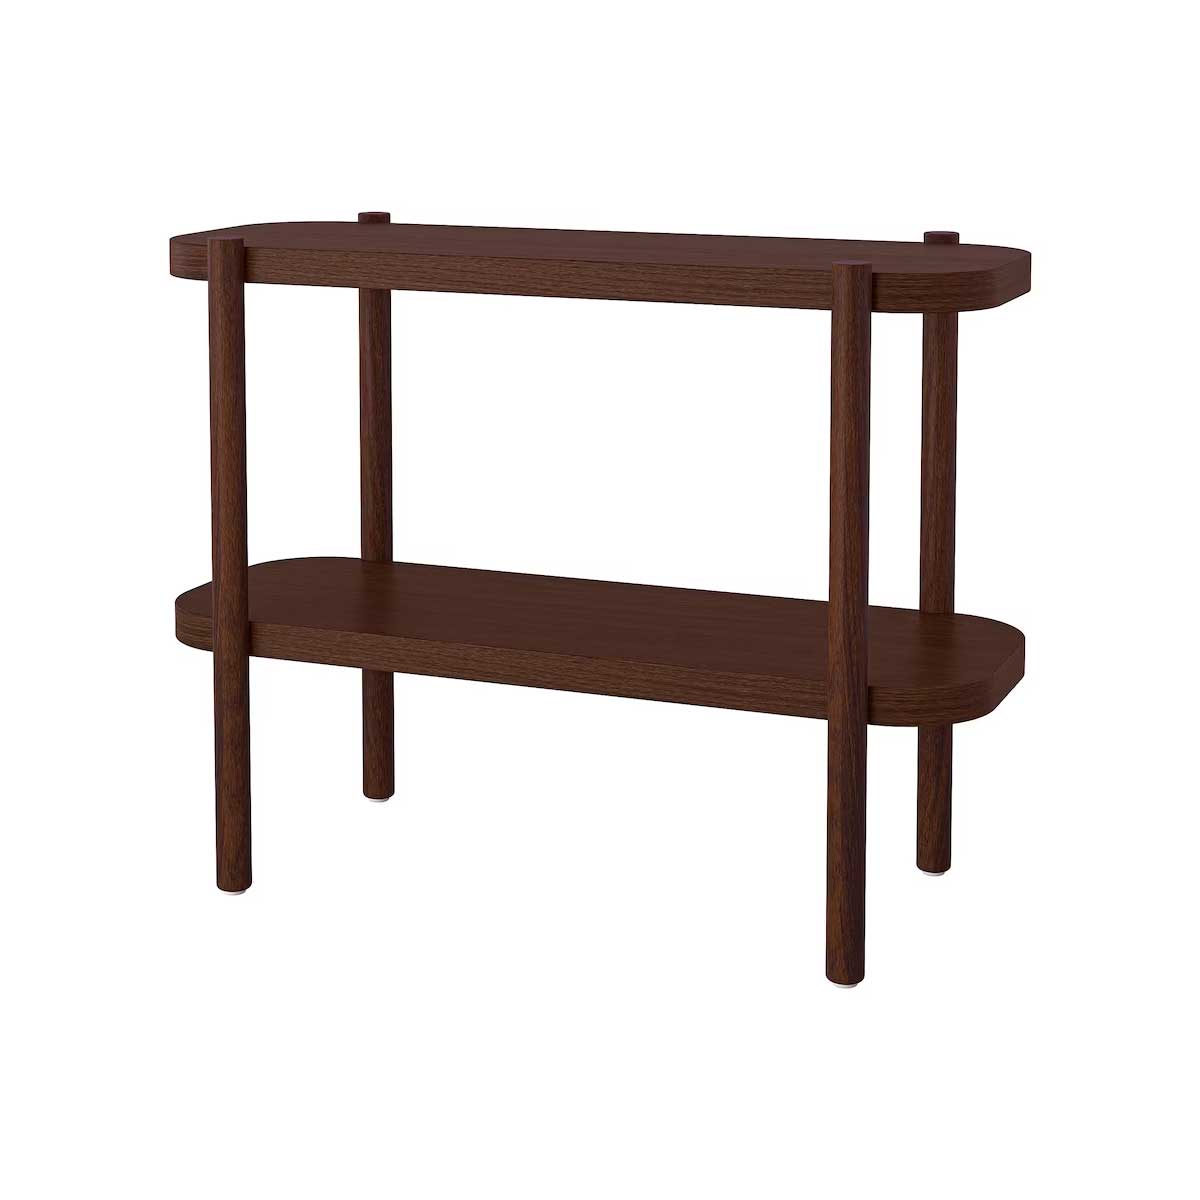 Listerby console table